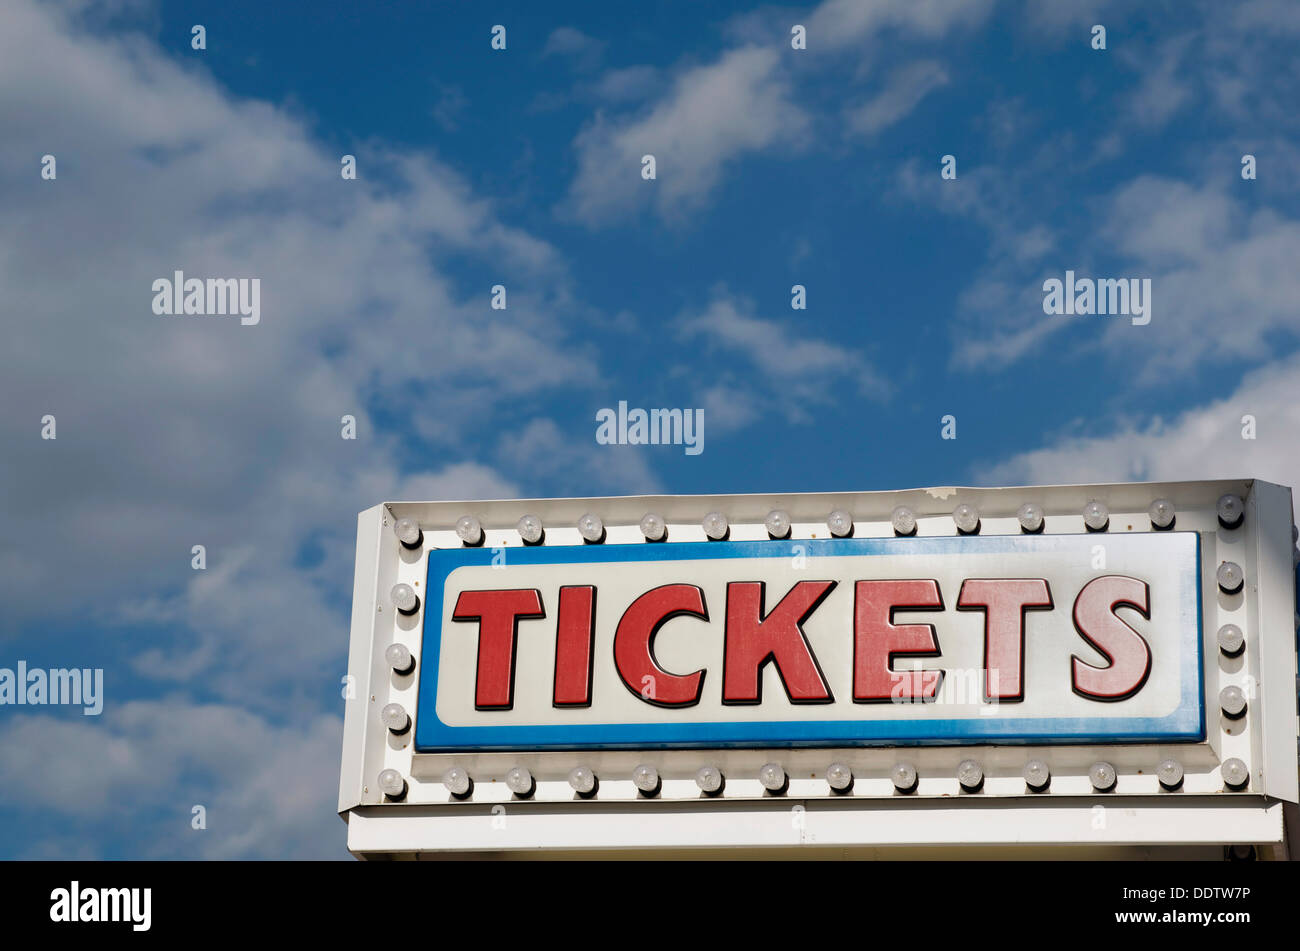 The word Tickets with light bulbs surrounding it as part of a ticket booth,on a blue sky white cloud background. Stock Photo